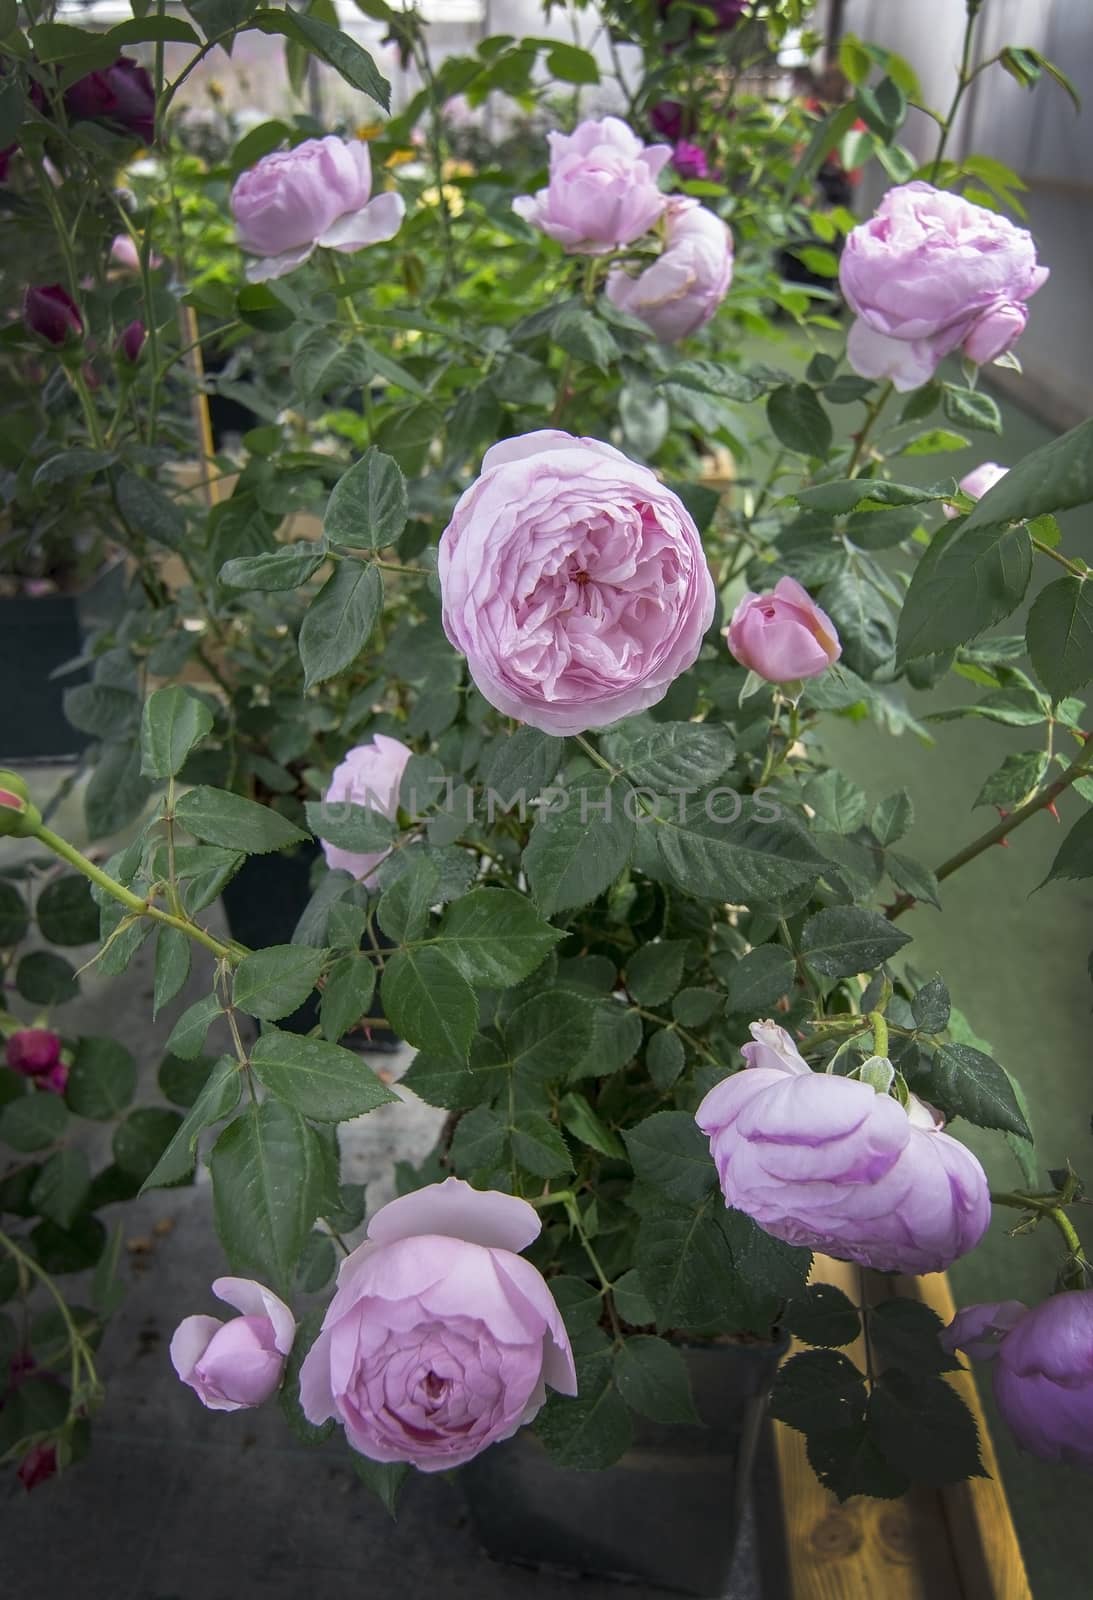 Gorgeous double pink rose flowers in pots. Spring garden series, Mallorca, Spain.